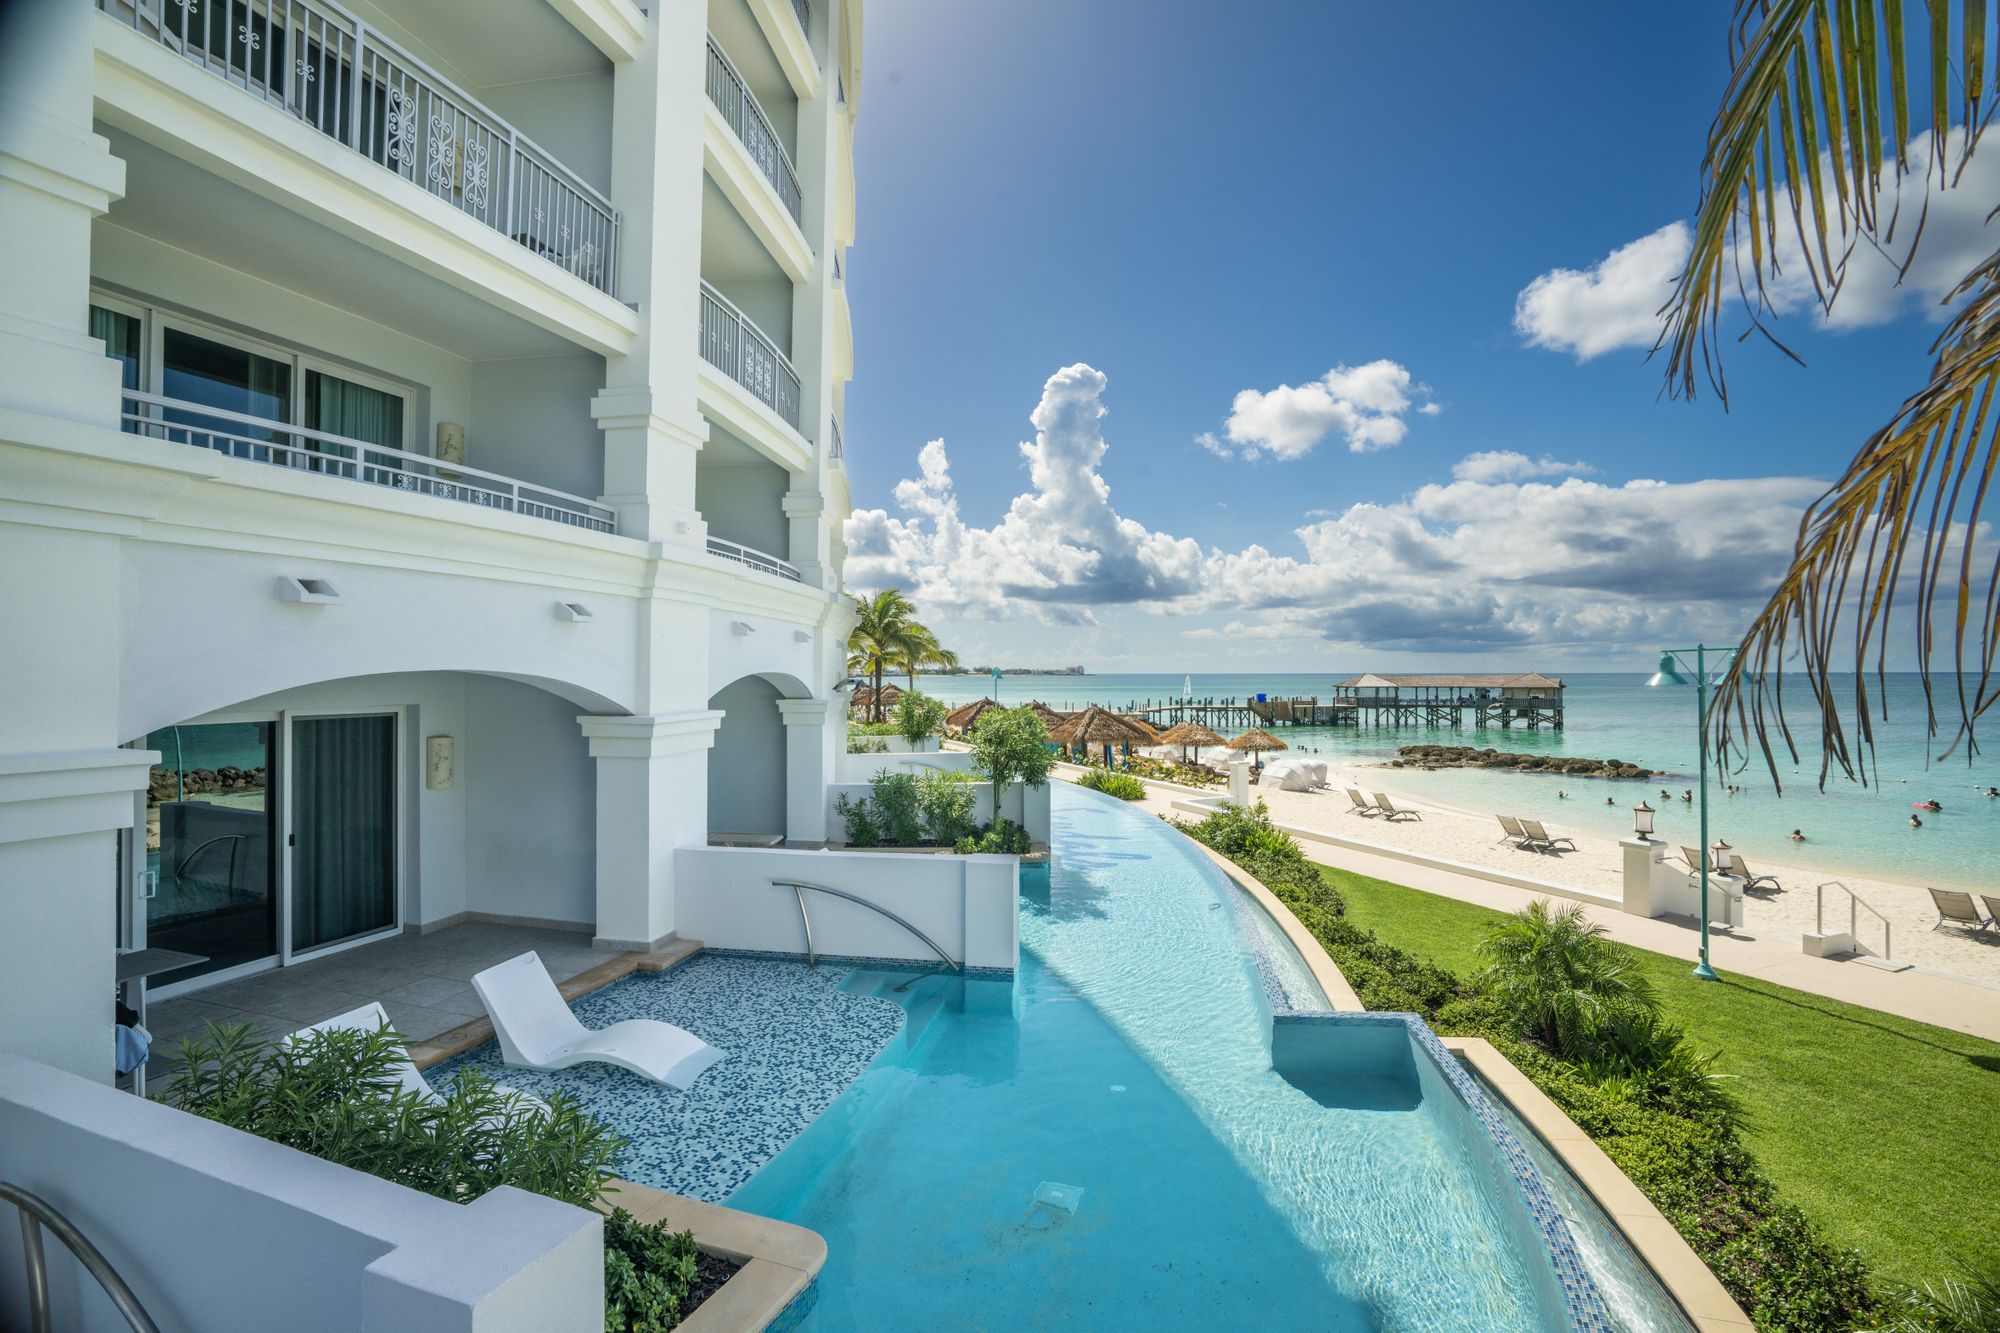 Explained: What’s The Difference Between Oceanview, Oceanfront and Beachfront Rooms?